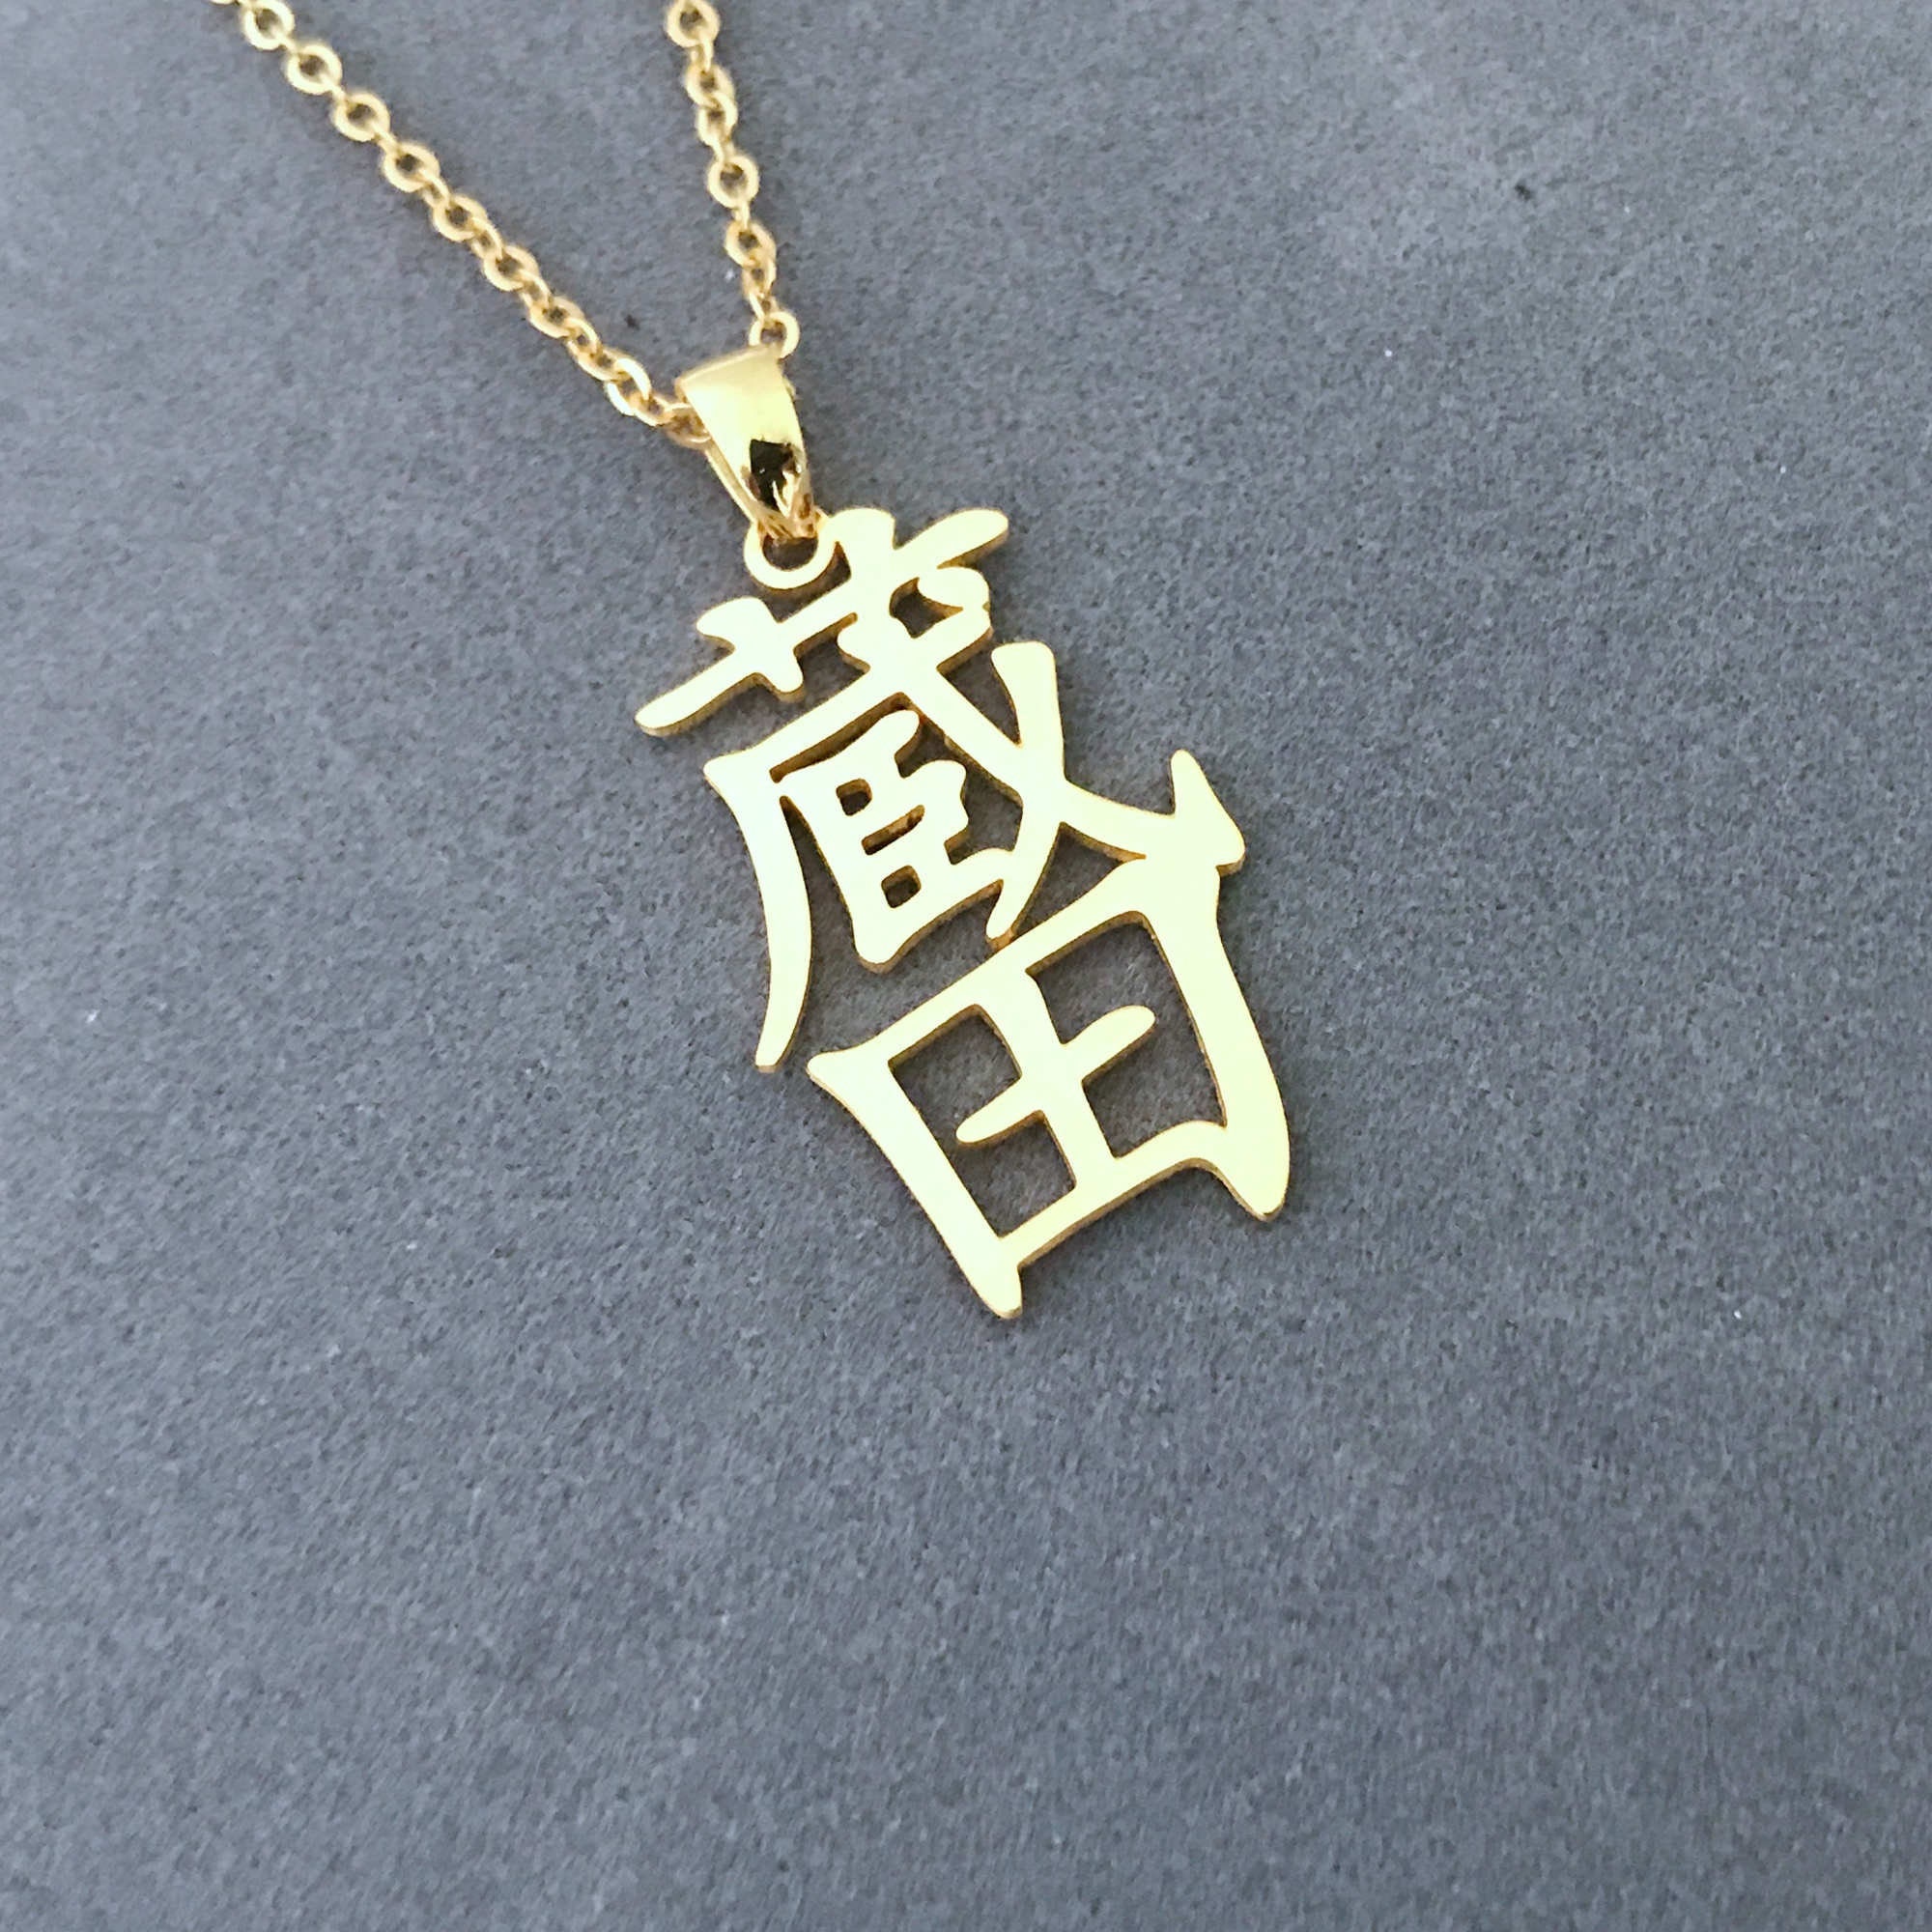 Japanese Kanji brave / Courage Necklace, Japanese Gifts, Inspirational  Motivational Gifts, Gift for Men Women Mens Pendant Ceramic Jewelry 